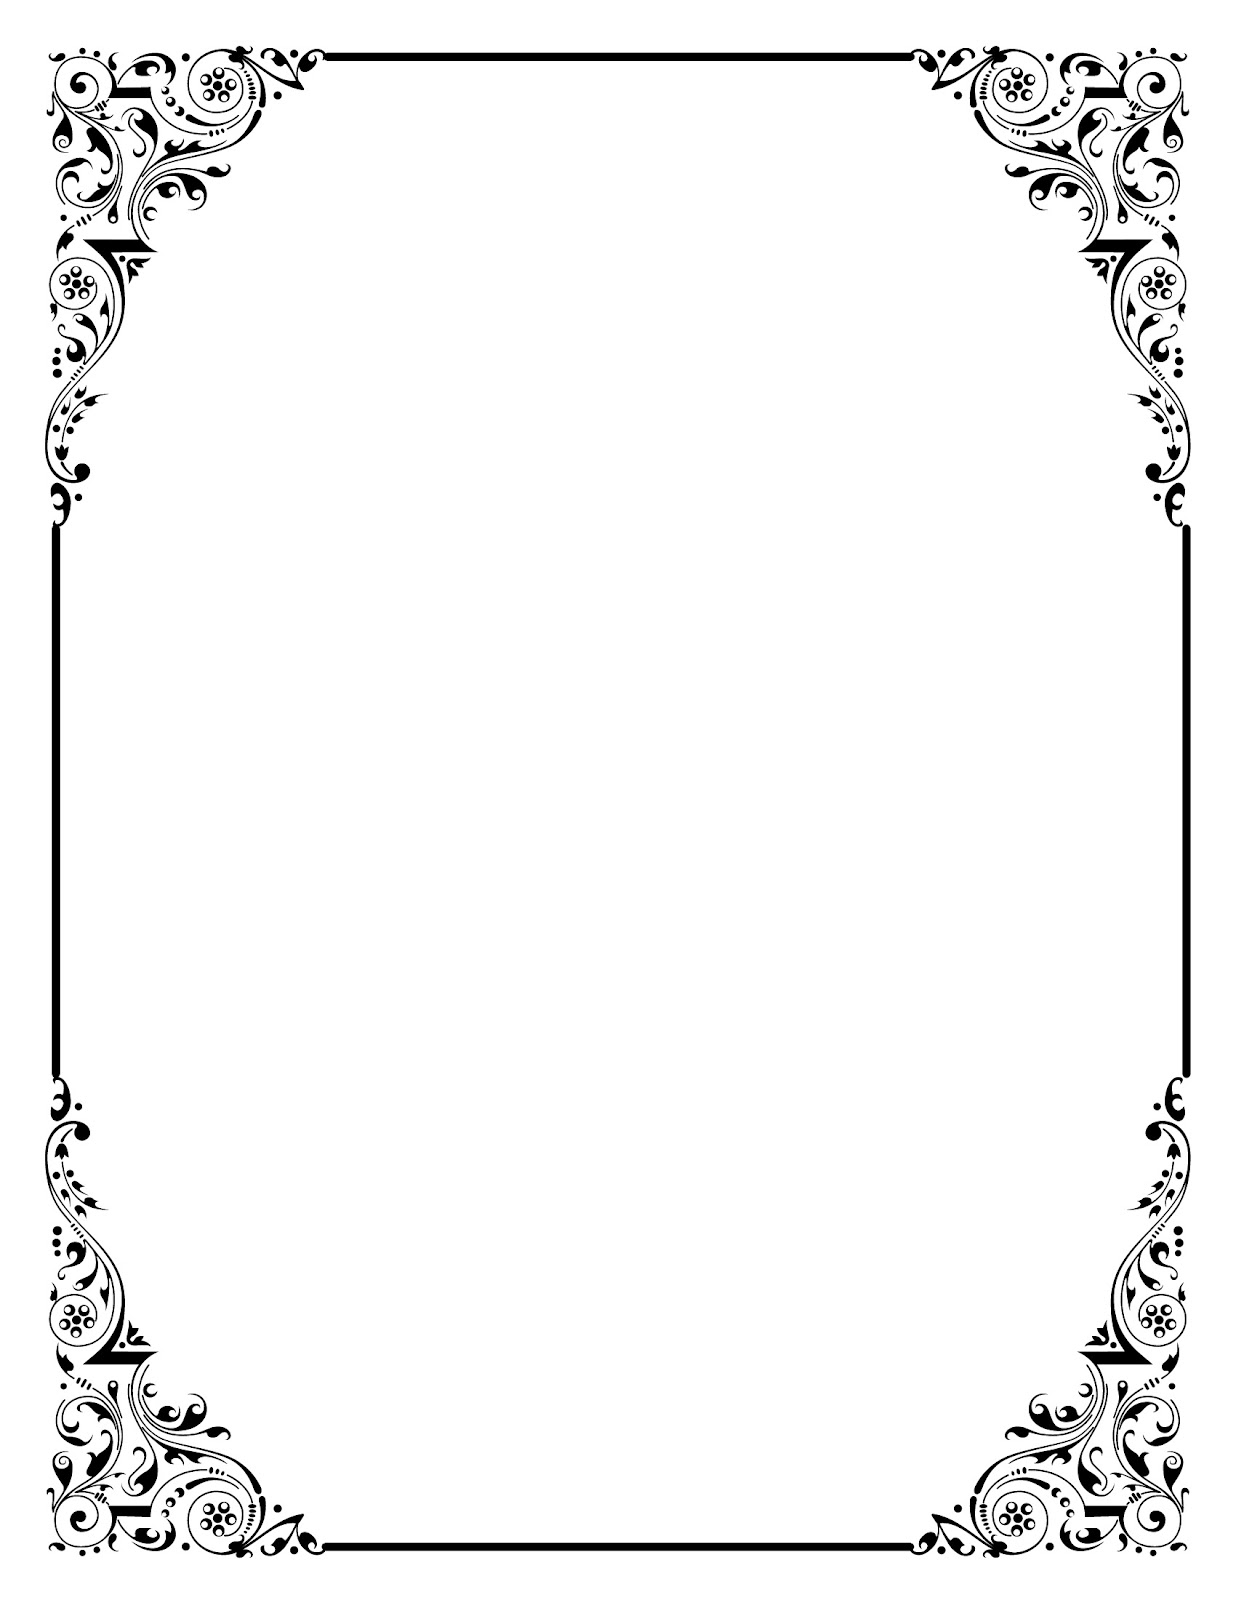 Frame clip art images free free clipart images - Cliparting.com